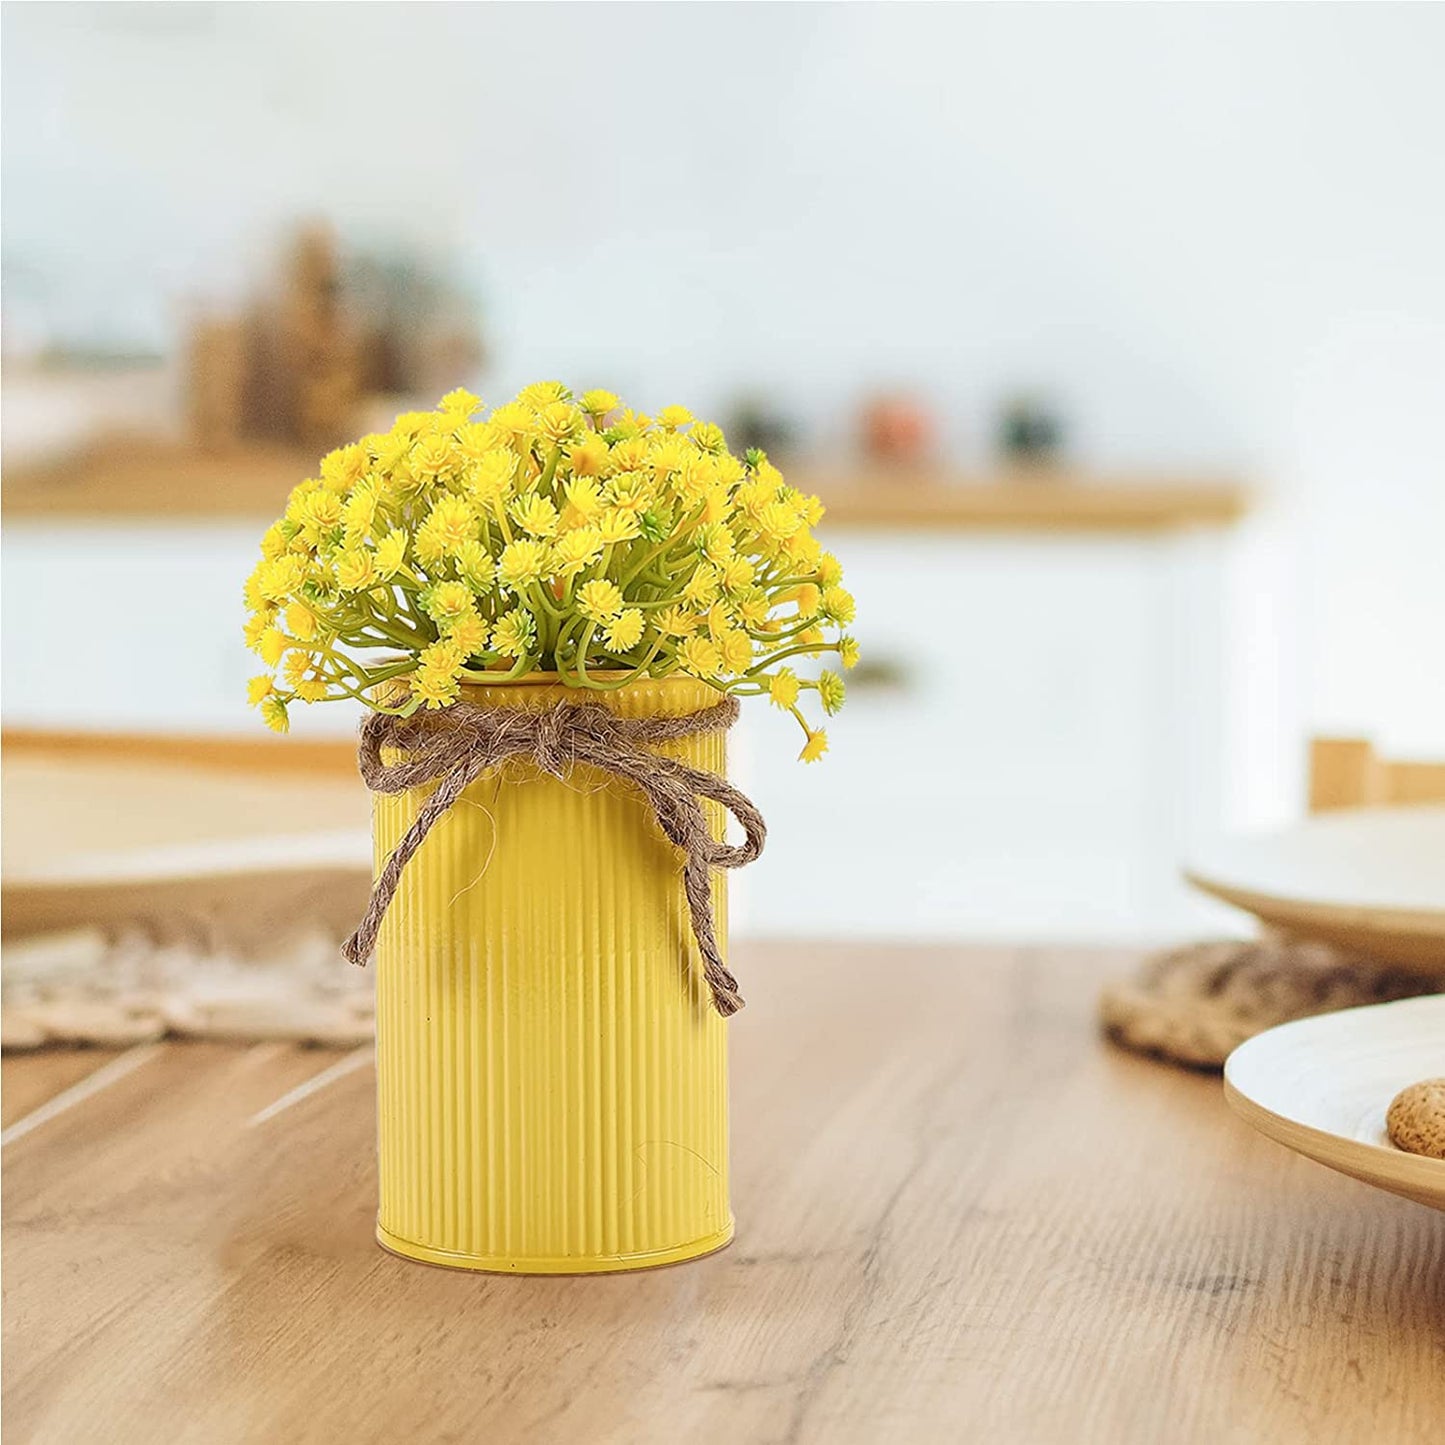 HomeXO Artificial Baby Breath 5 Pcs Yellow color Real Touch Flowers Height 20" for for Vases Bouquets Indoor Outdoor Home Kitchen Office Table Centerpieces Arrangement Decoration (Yellow 5 pcs)